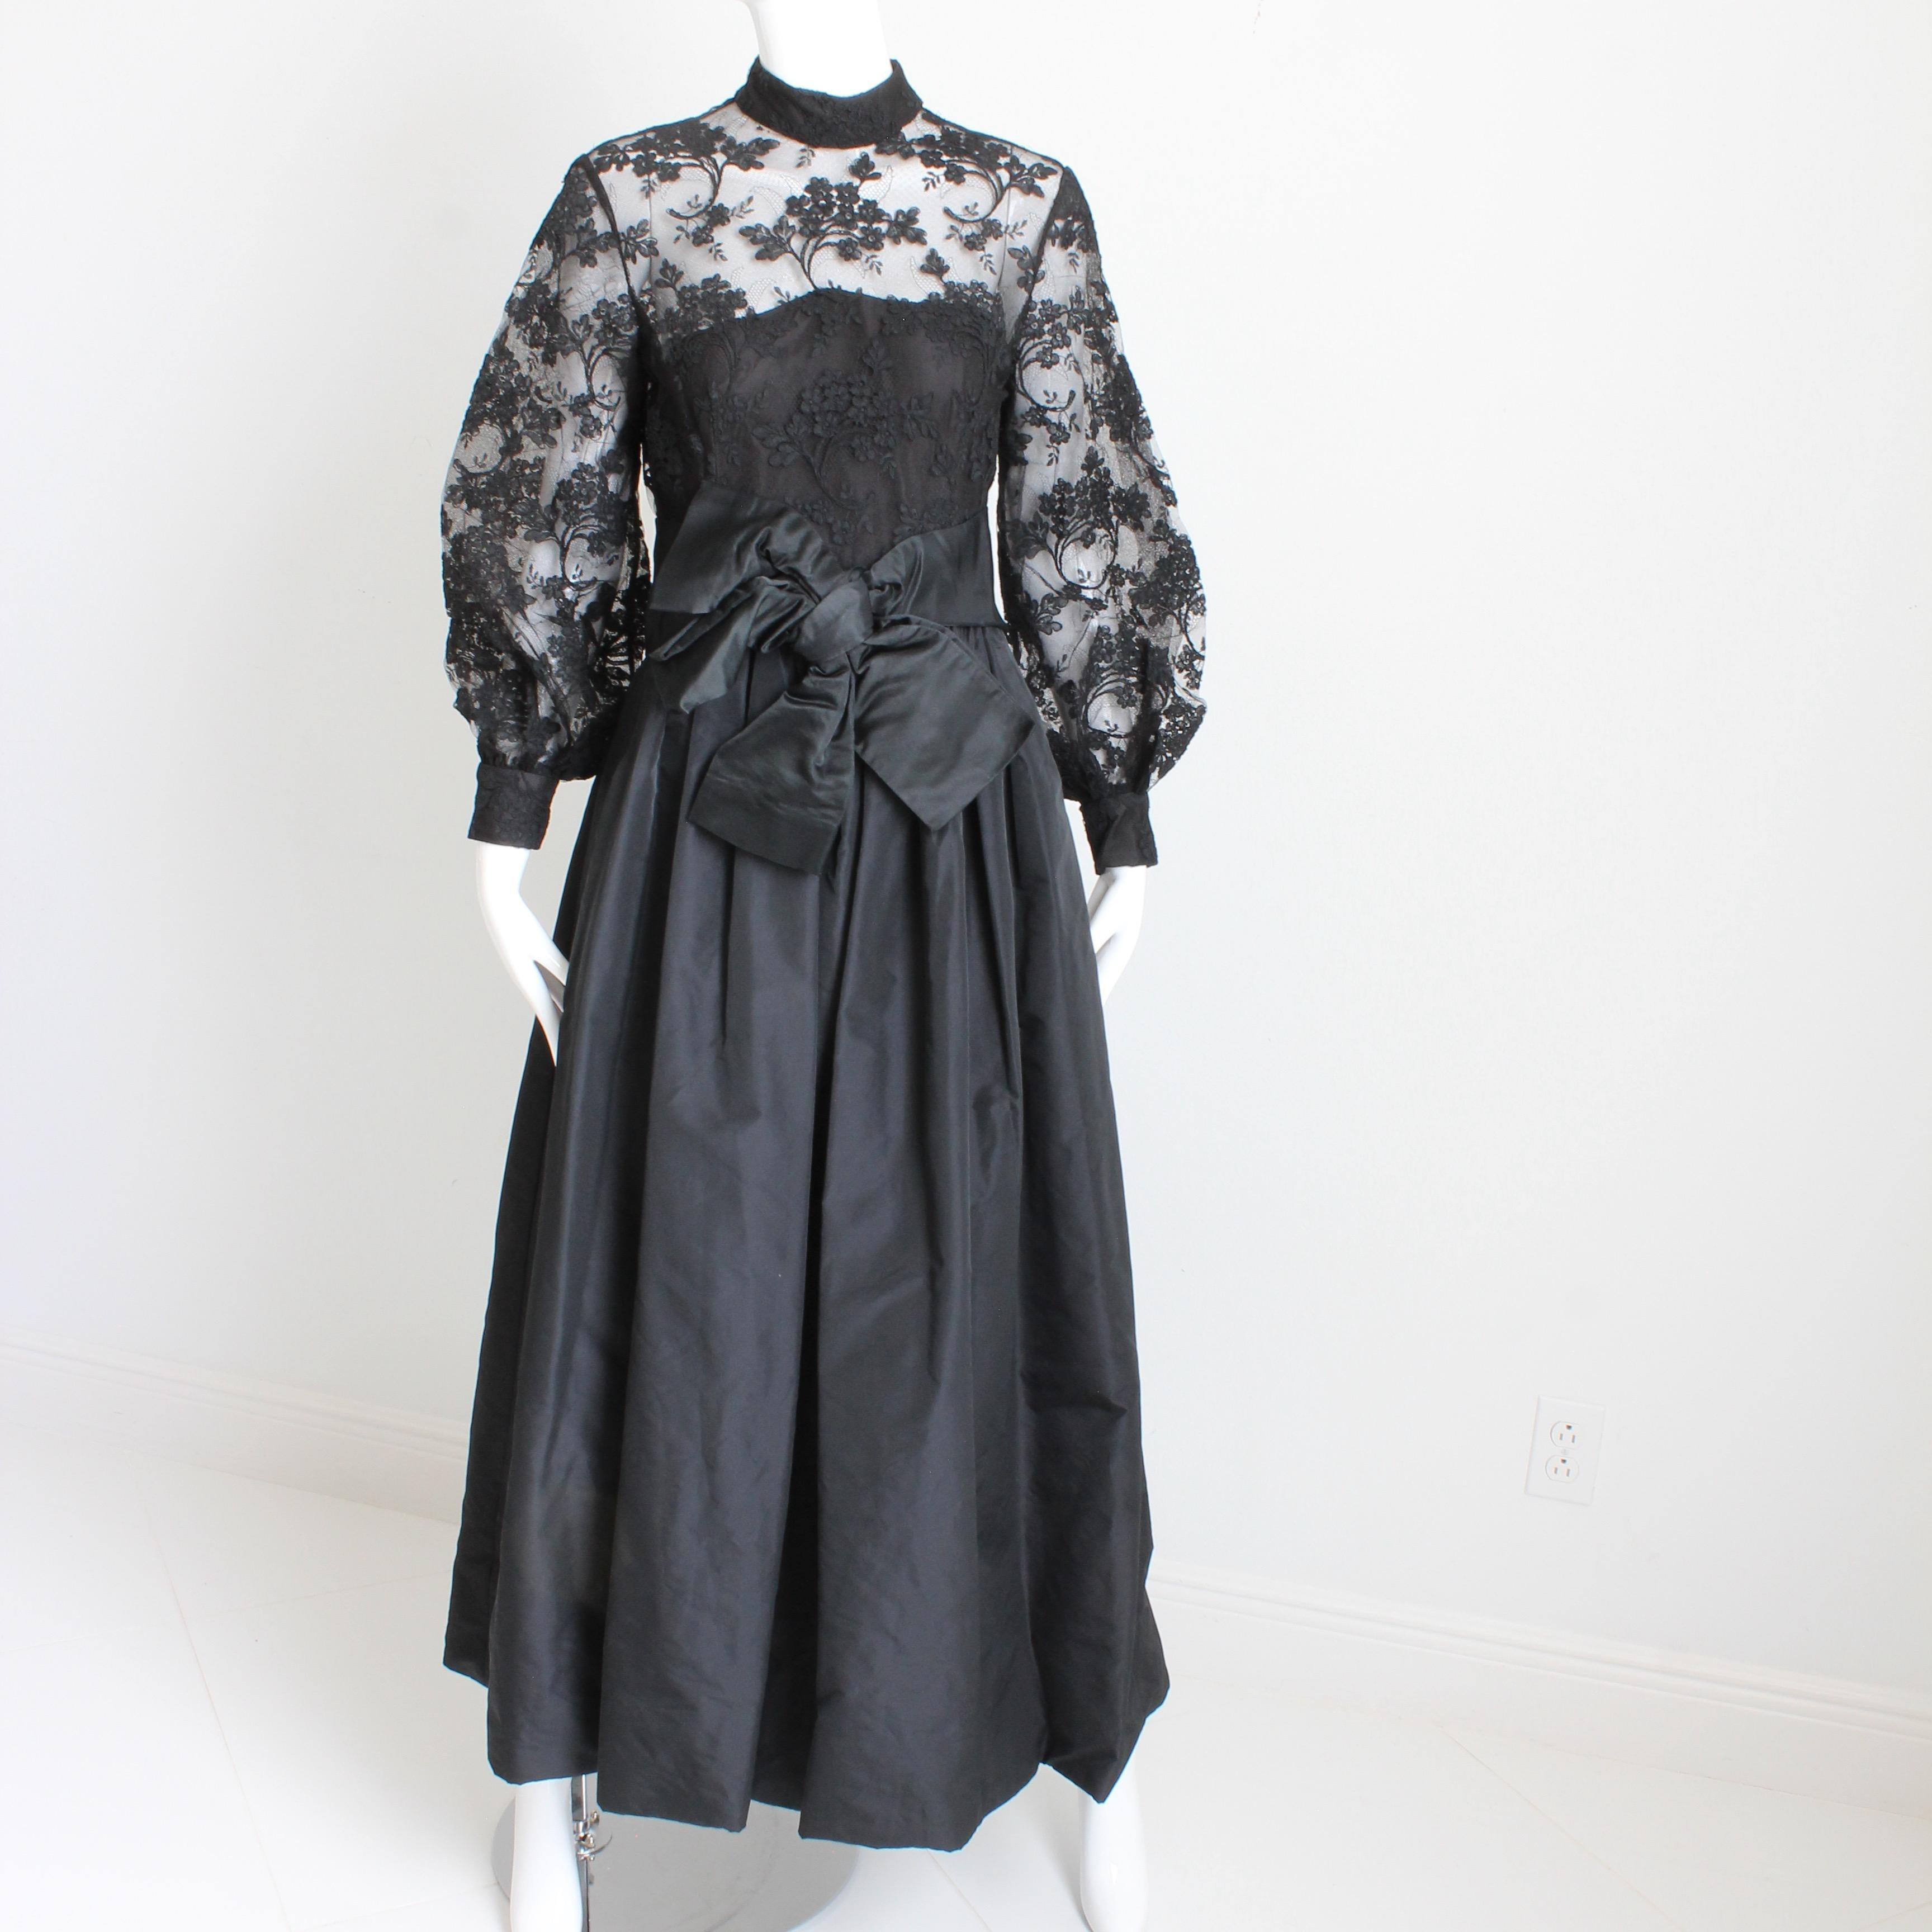 Women's Ronald Amey Evening Gown Black Lace and Silk Taffeta Formal Dress Vintage 70s  For Sale